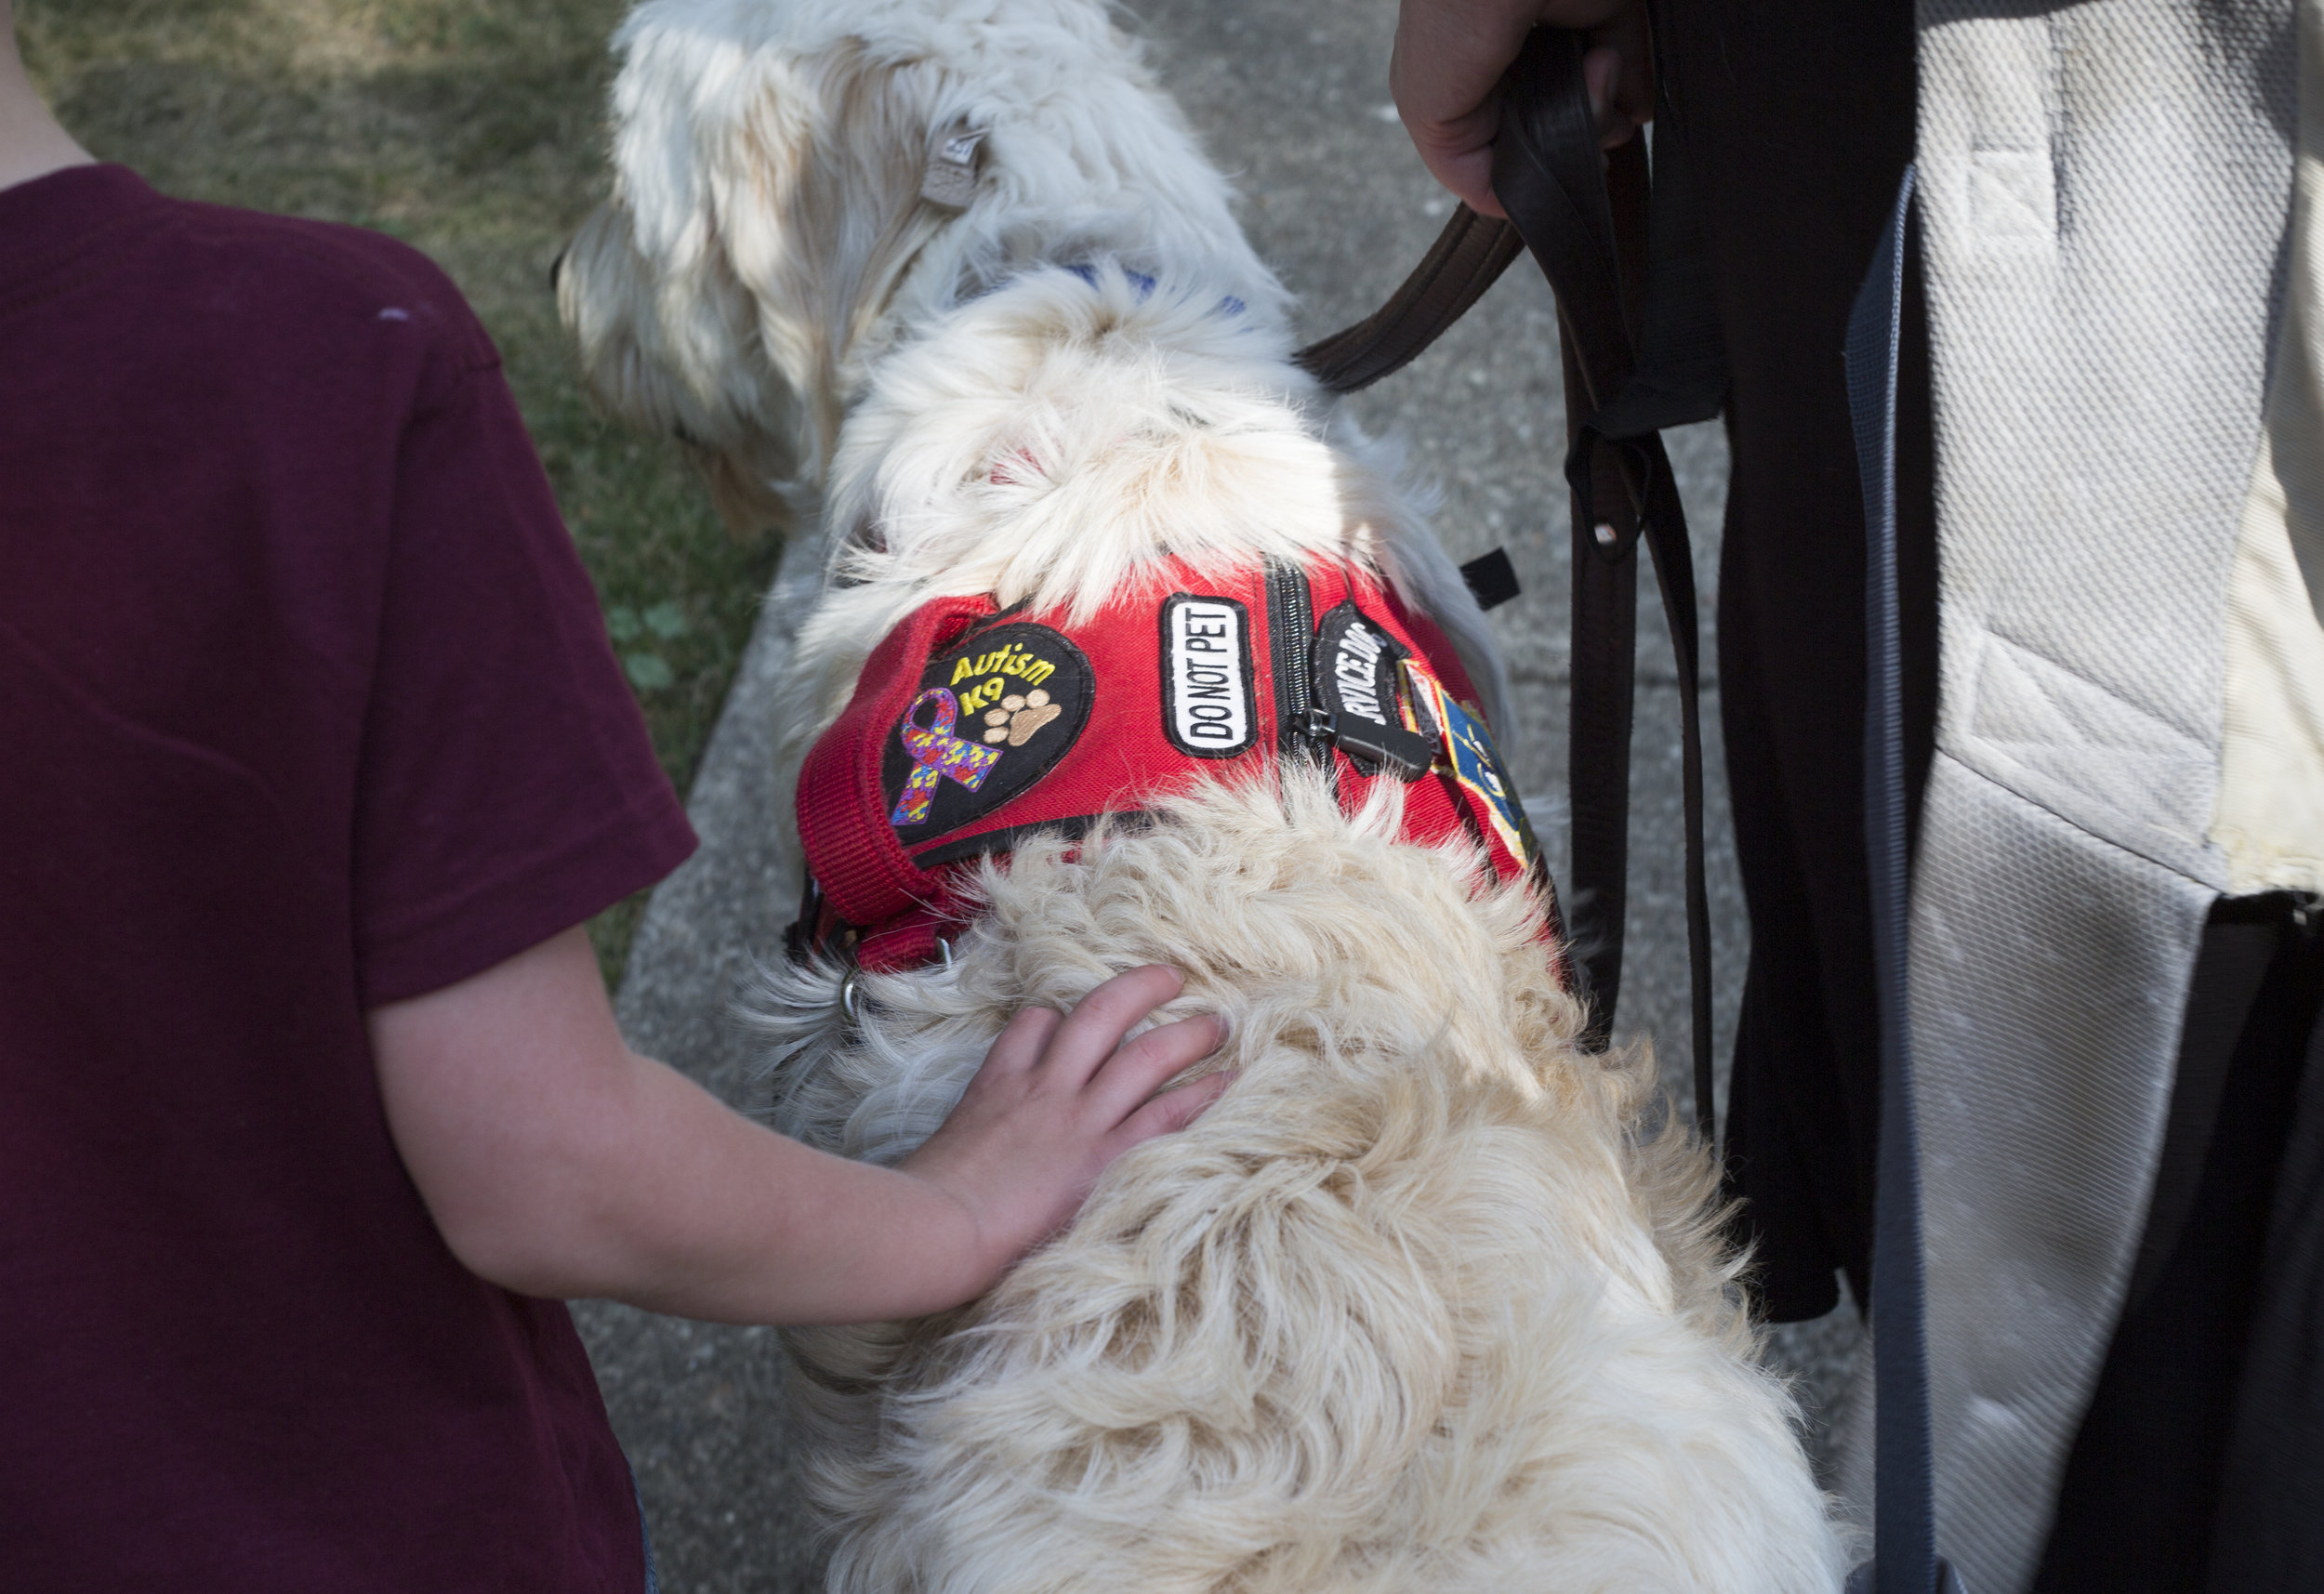  Josiah puts a hand on Spad during their walk to school. Josiah sometimes  touches or holds on to Spad as a source of comfort. Spad is also  trained to disrupt some of Josiah's behaviors by touching him with his  paw, nuzzling him with his snout, and